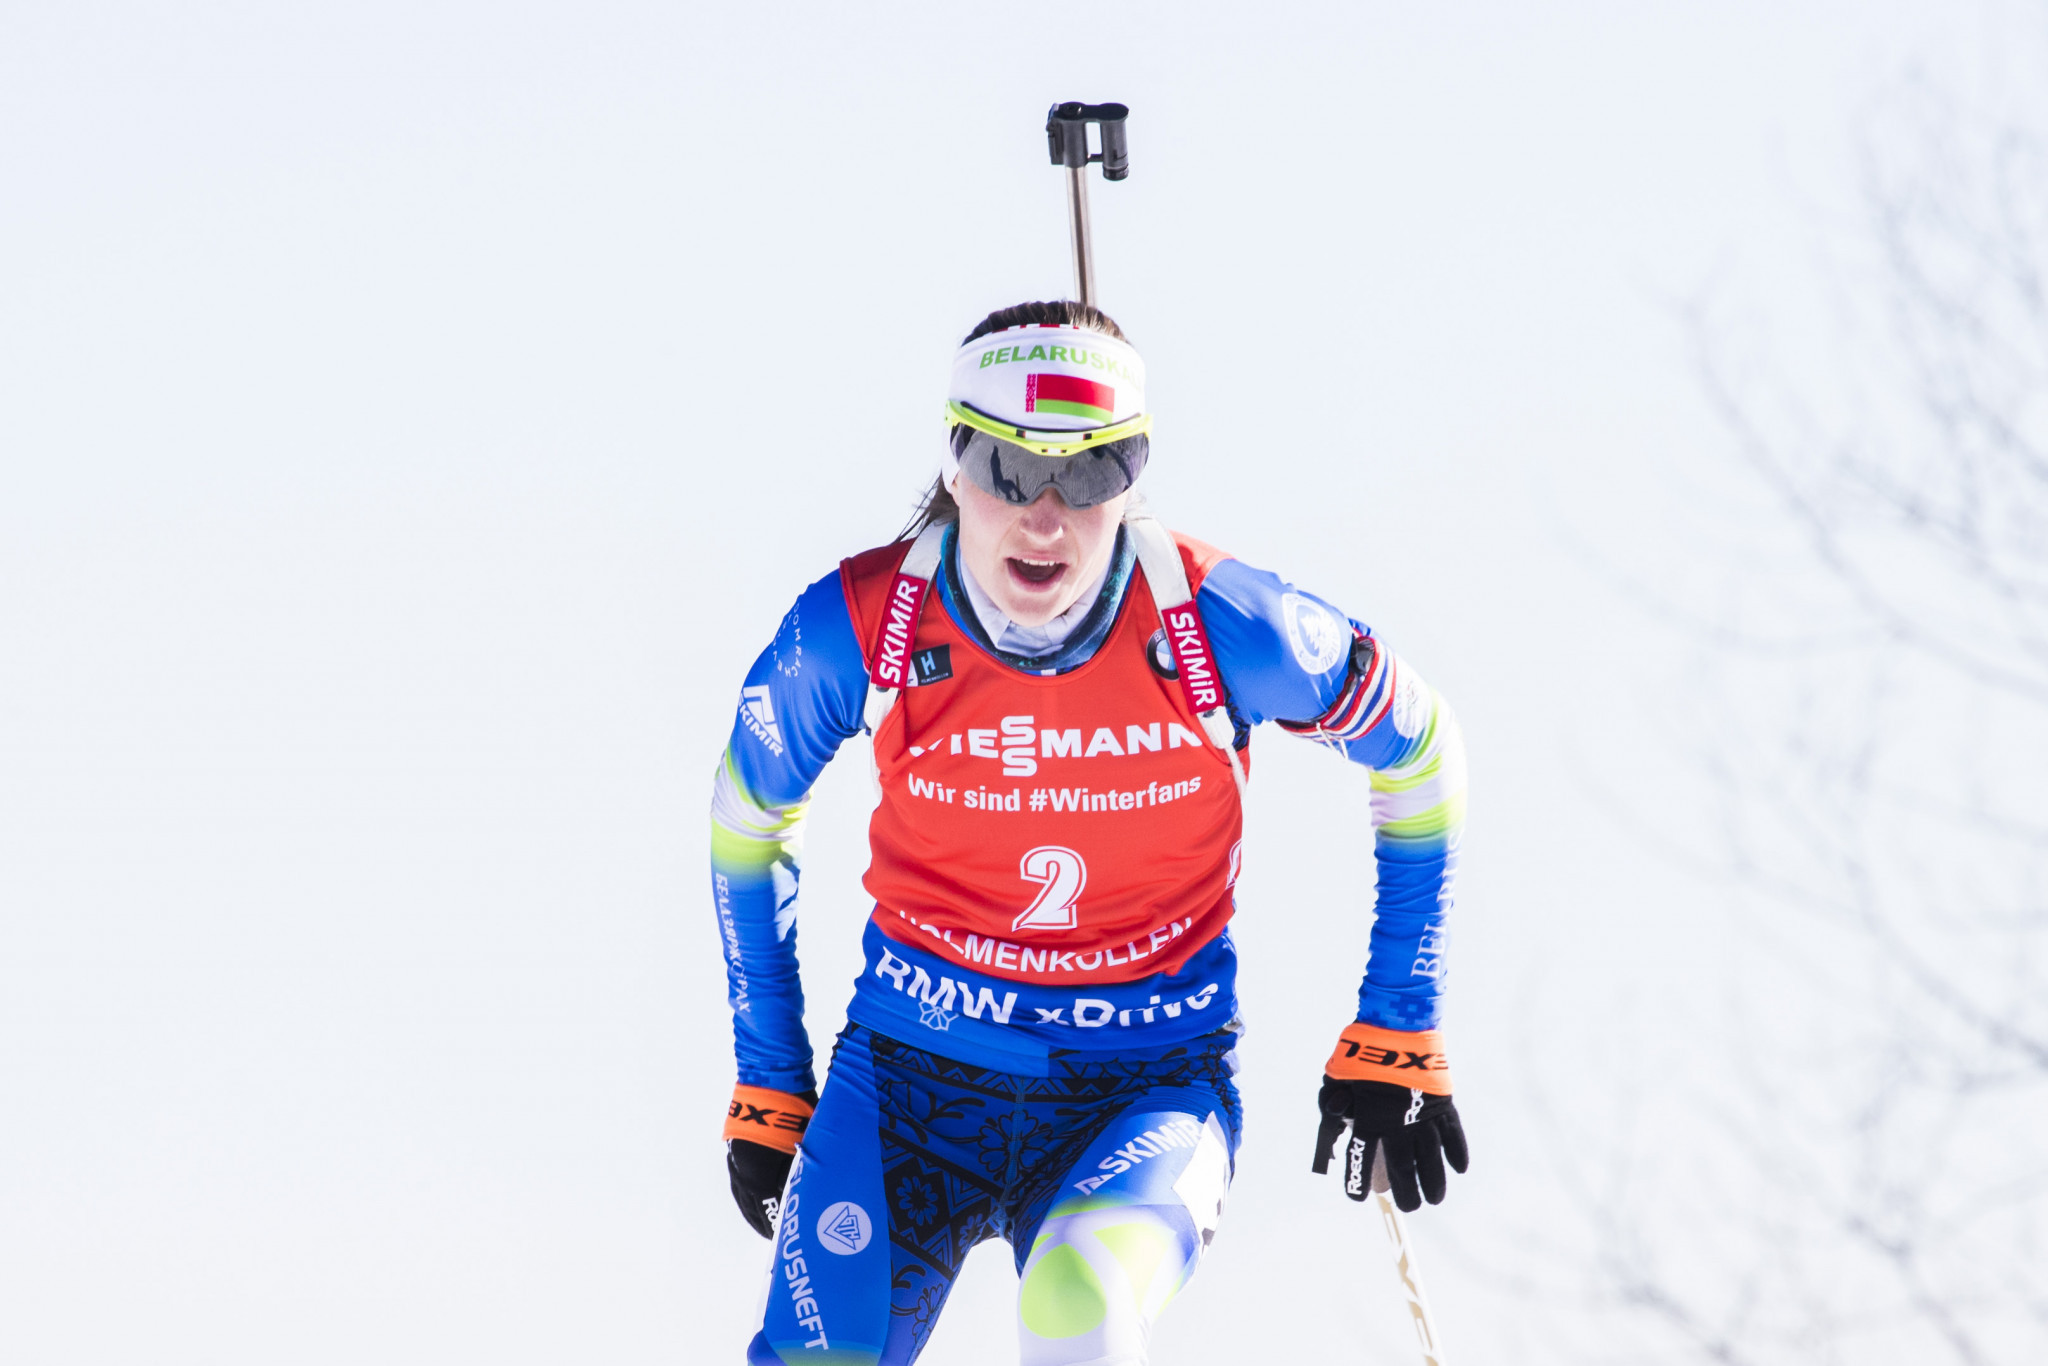 Domracheva receives overall IBU World Cup pursuit title after Glazyrina disqualified